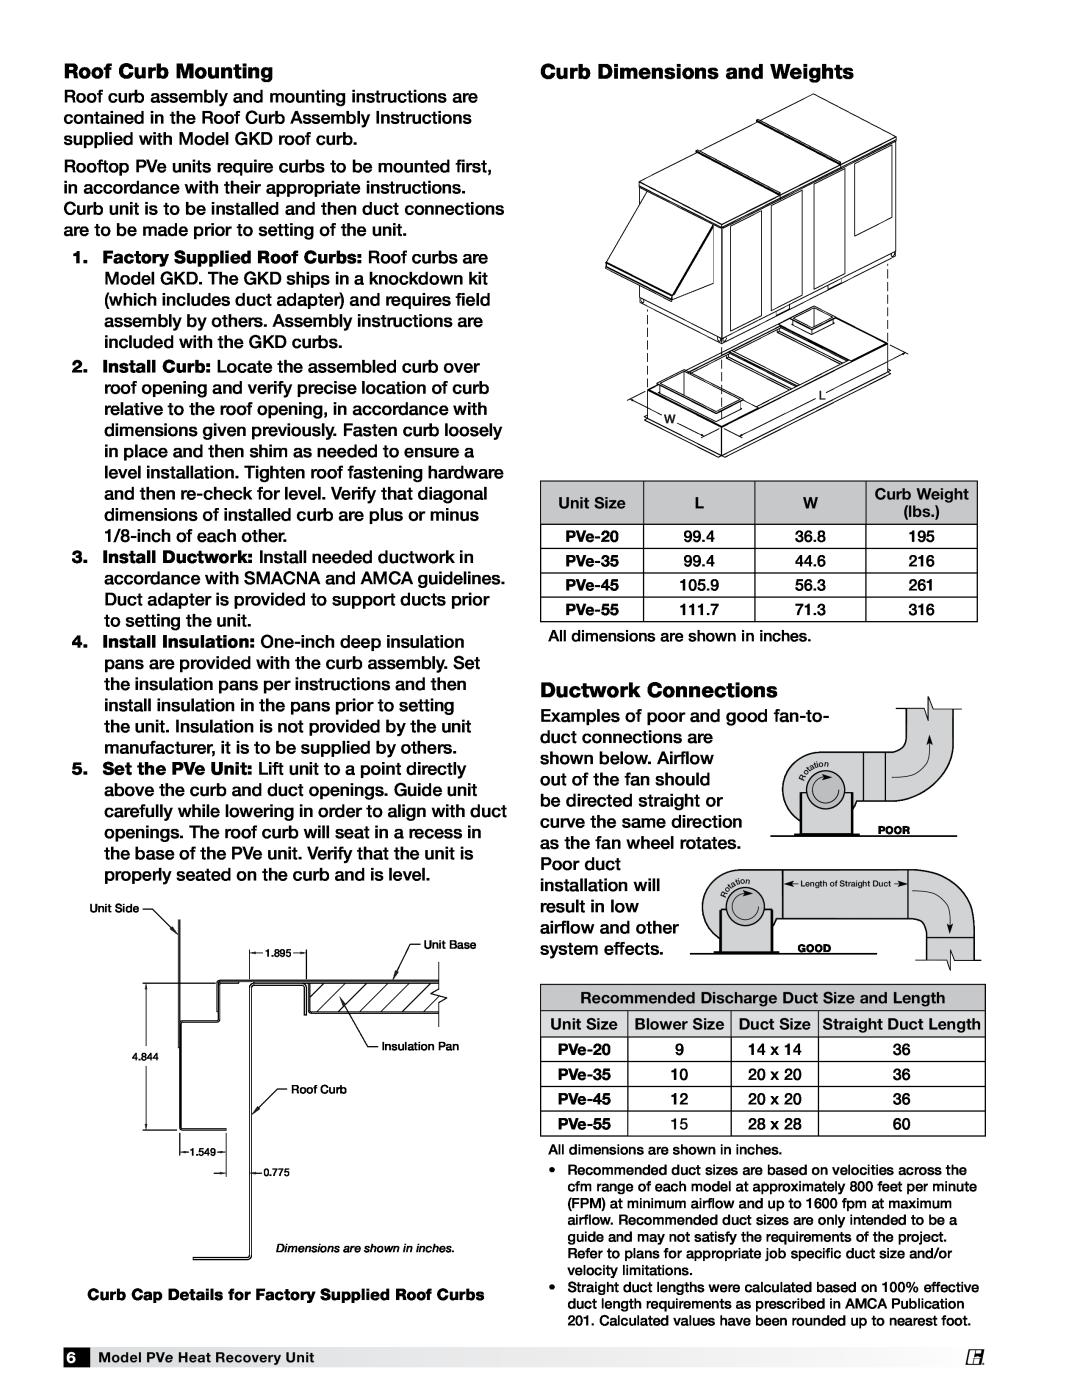 Greenheck Fan PVE-20, PVE-55, PVE-35, PVE-45 manual Roof Curb Mounting, Curb Dimensions and Weights, Ductwork Connections 